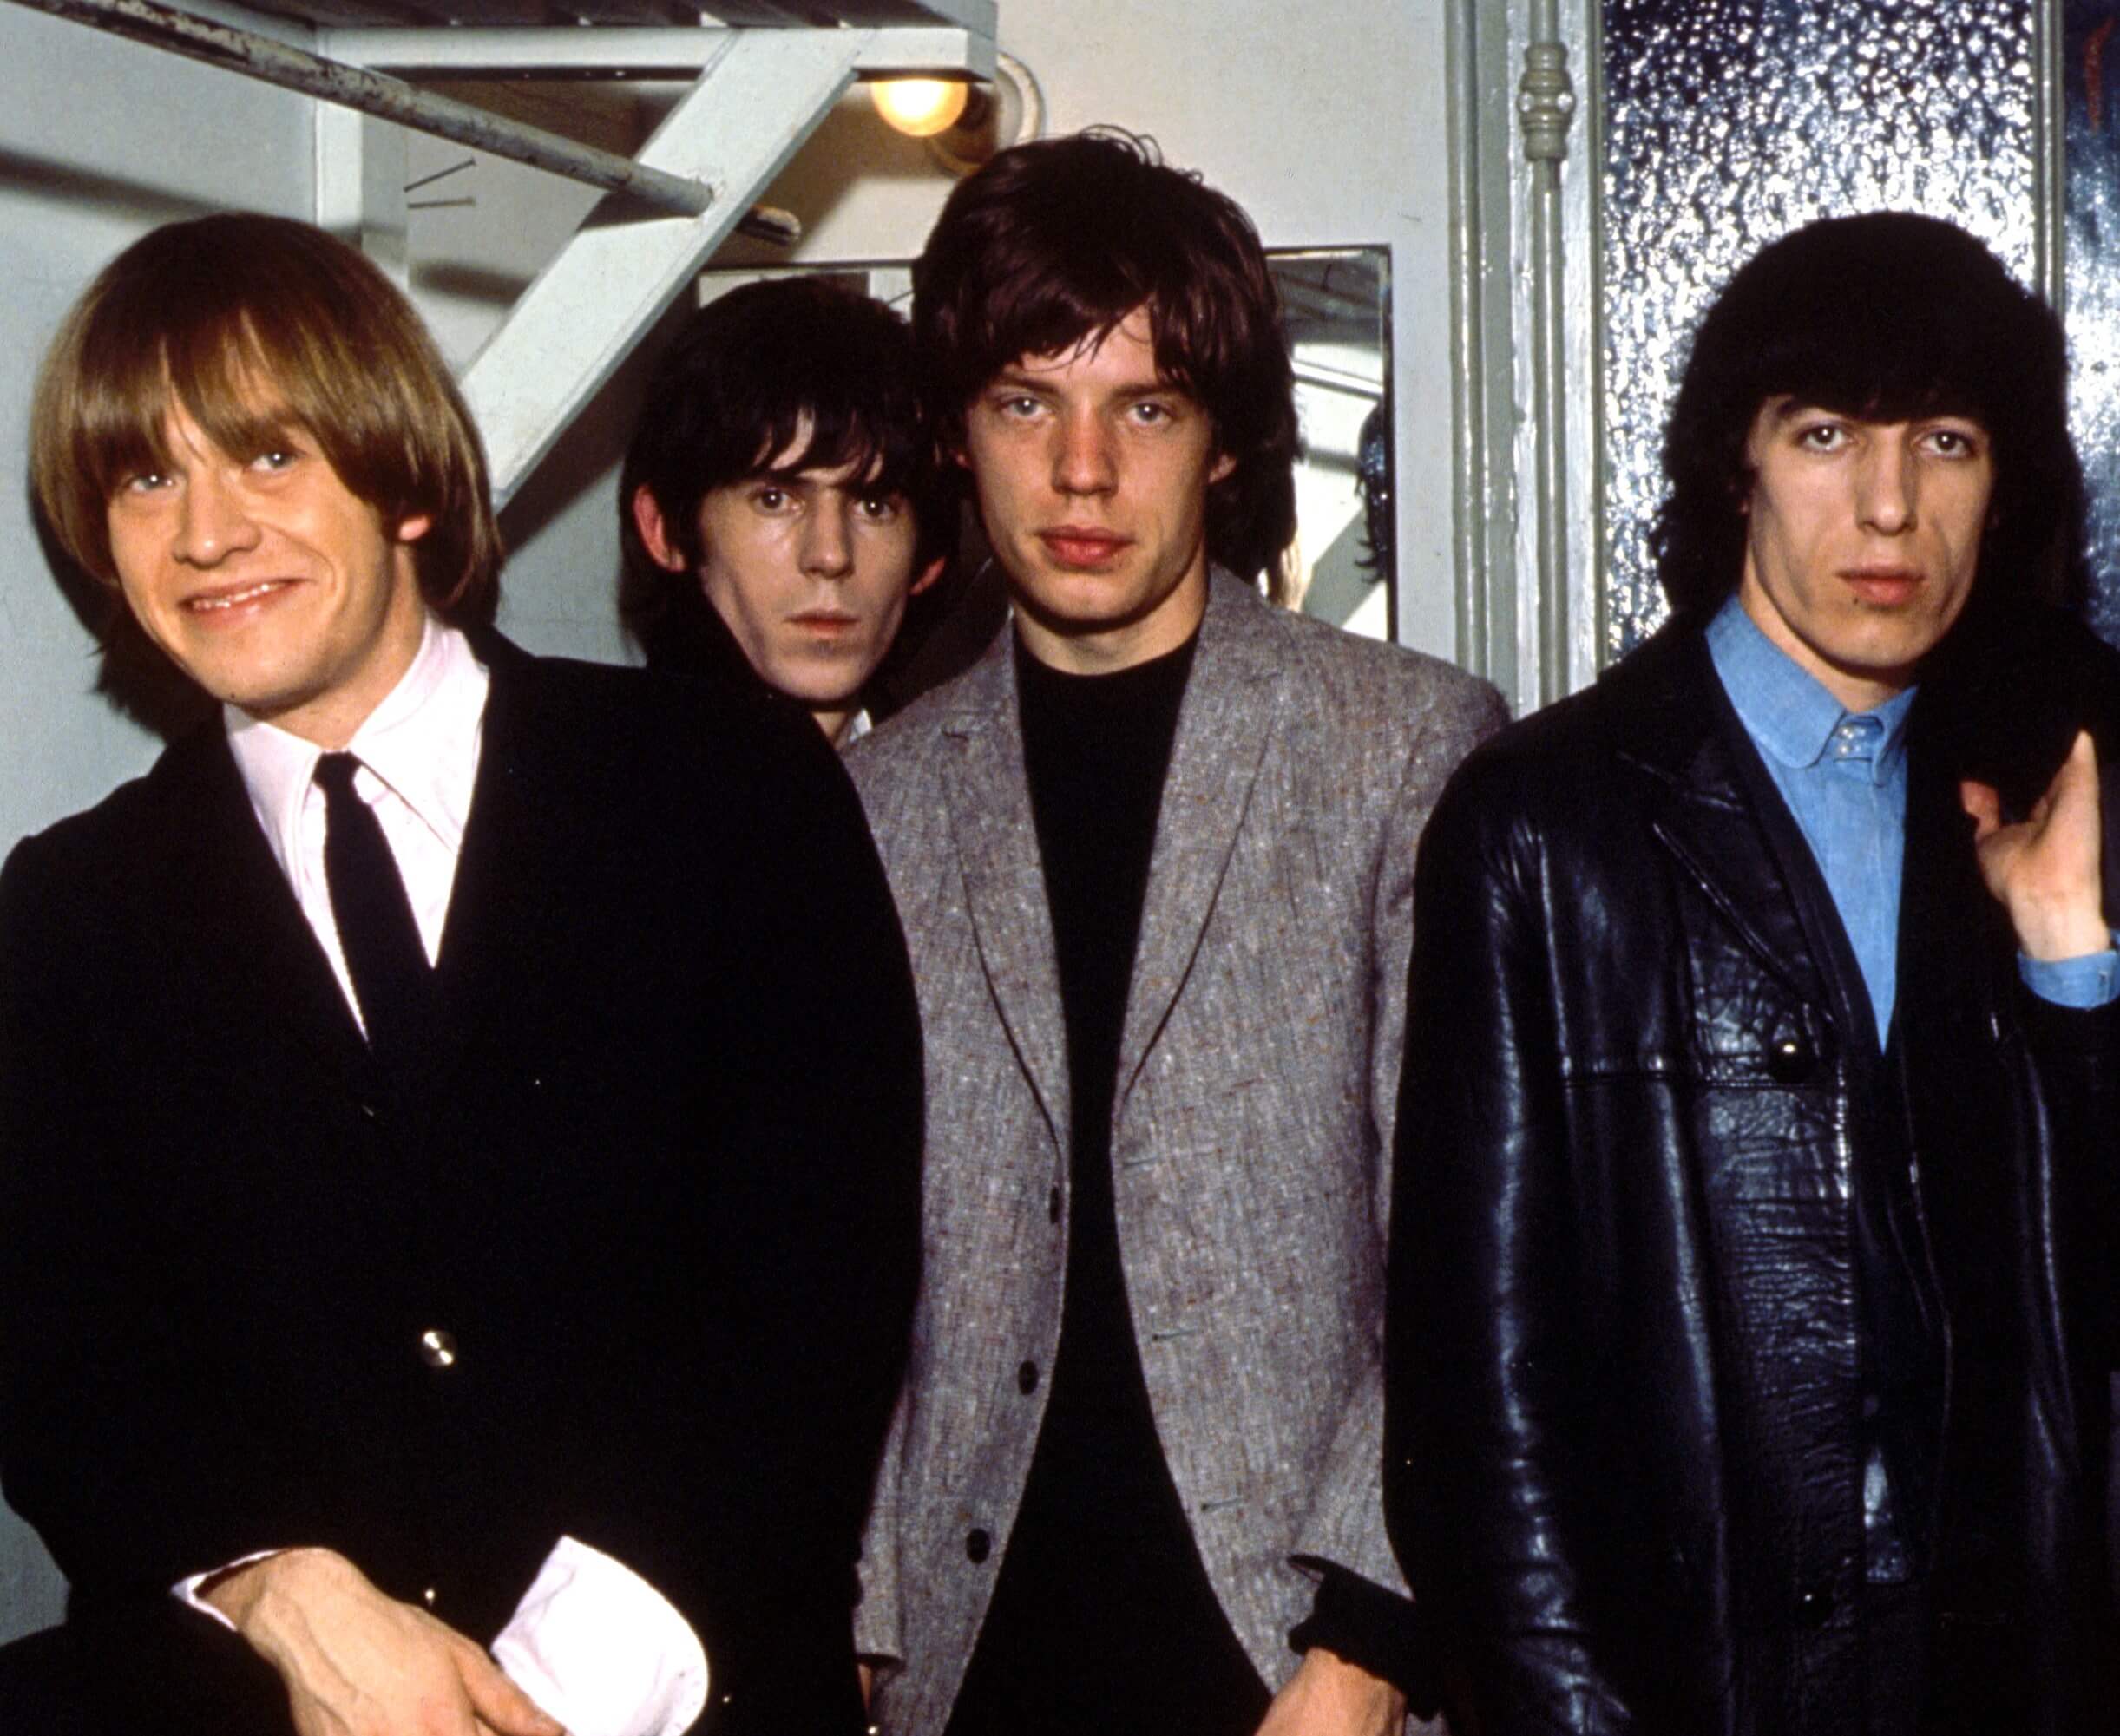 The Rolling Stones in a row during the "(I Can't Get No) Satisfaction" era